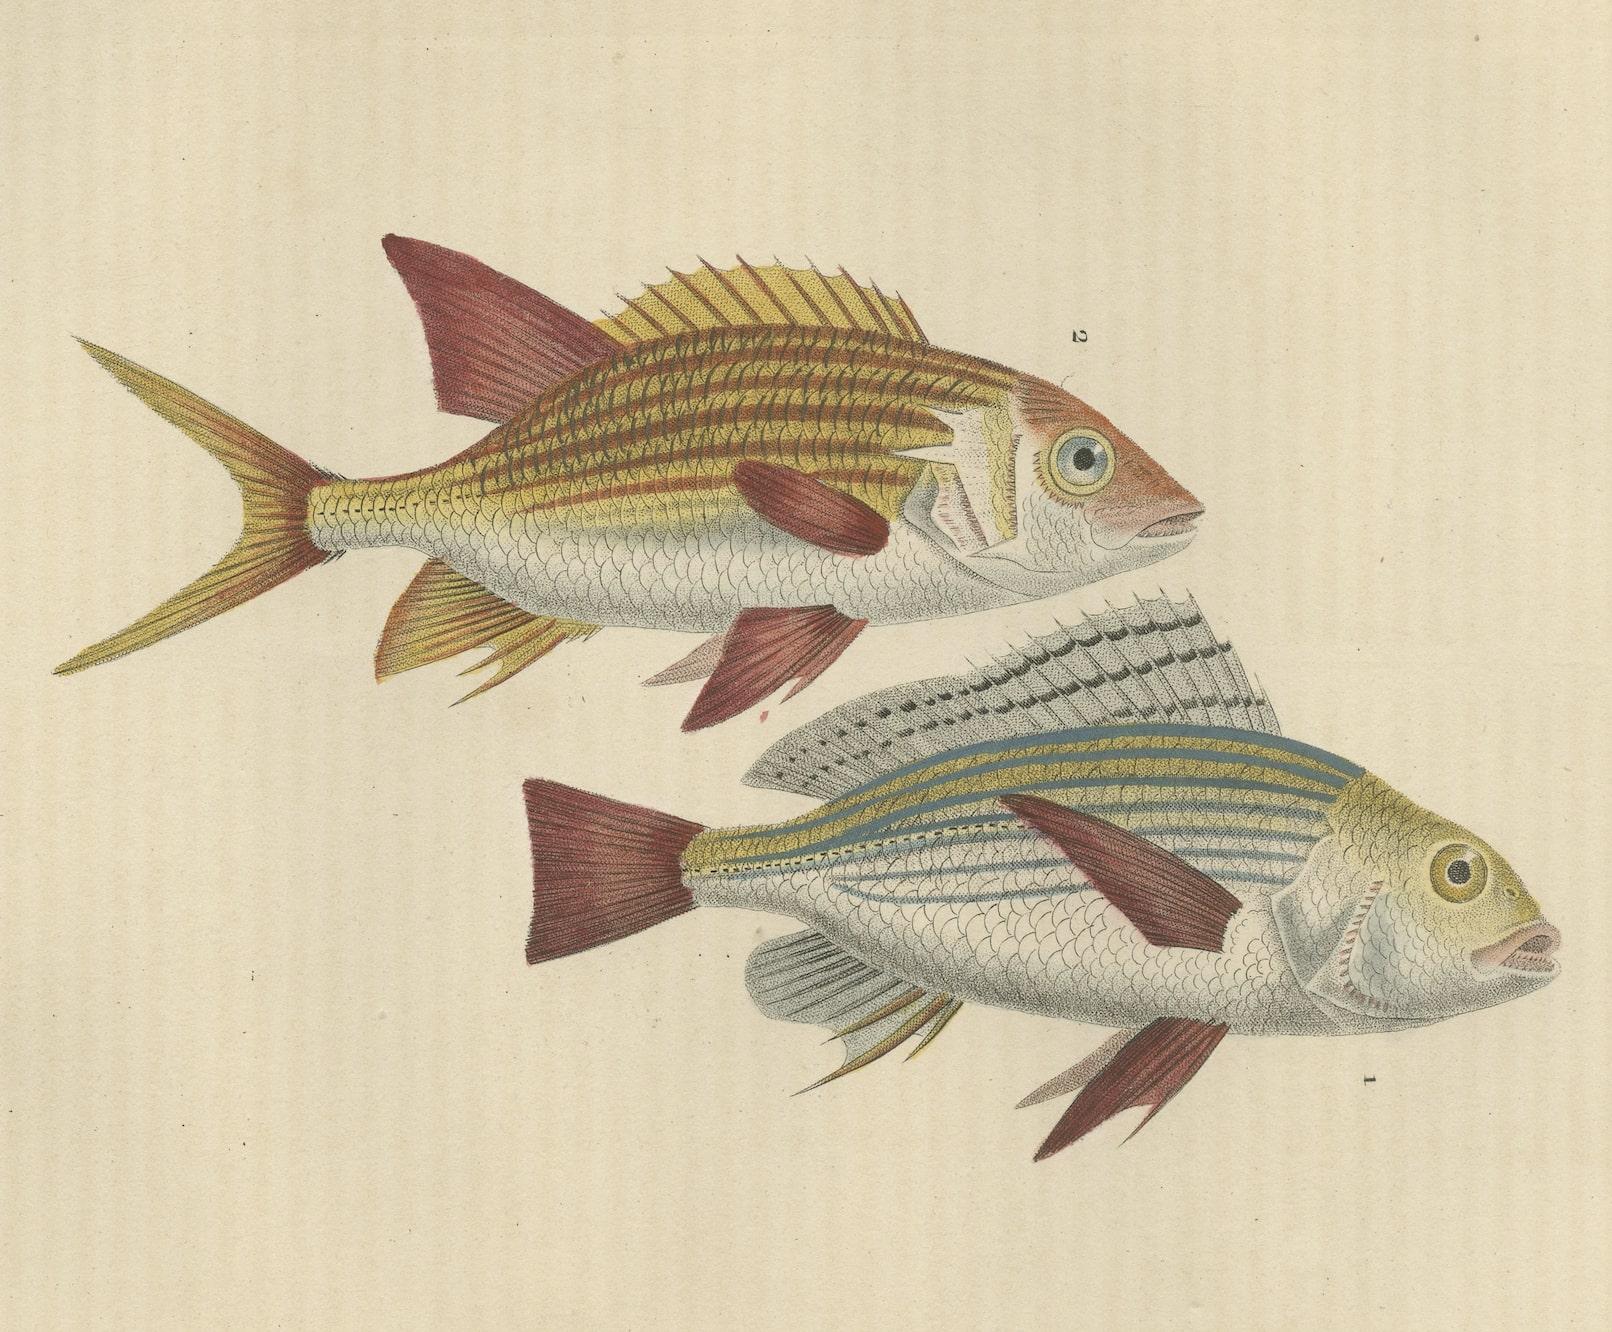 An attractive antique hand-colored print by Pierre Auguste Joseph Drapiez, depicting marine species.

The English names for the species mentioned are as follows:

1. **Pristipoma piqué:** Commonly known as the 